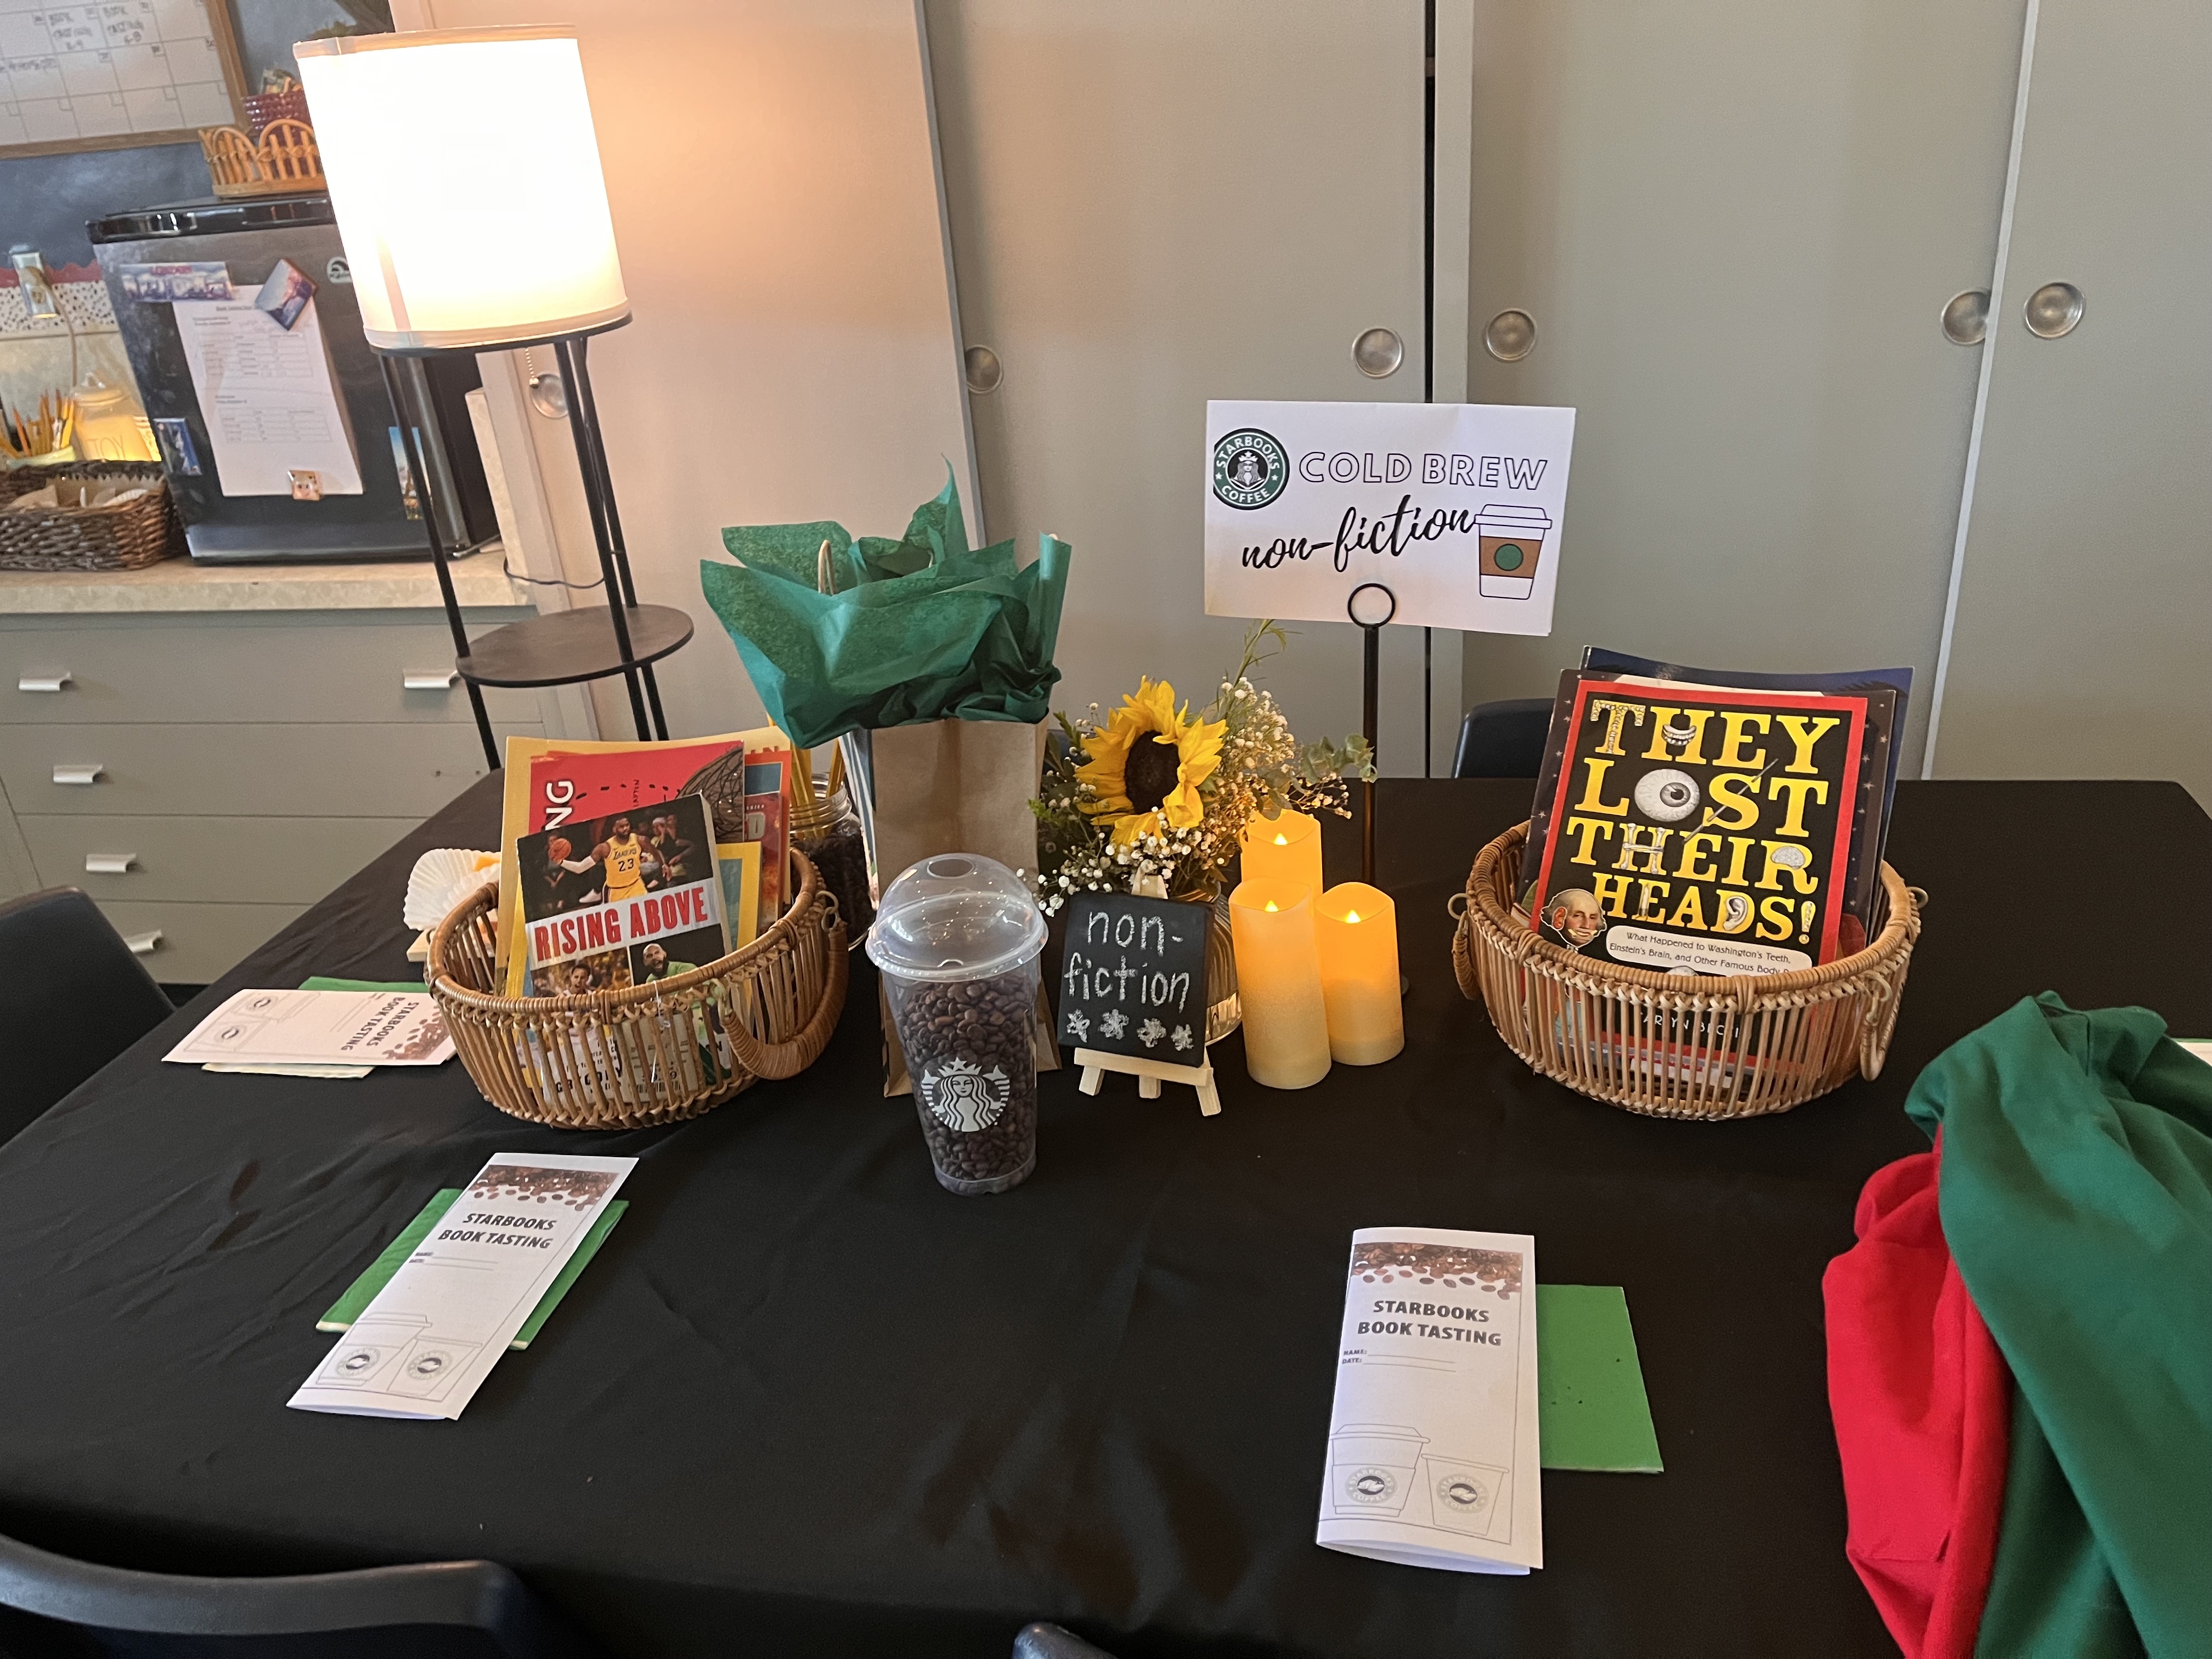 Table at book tasting event